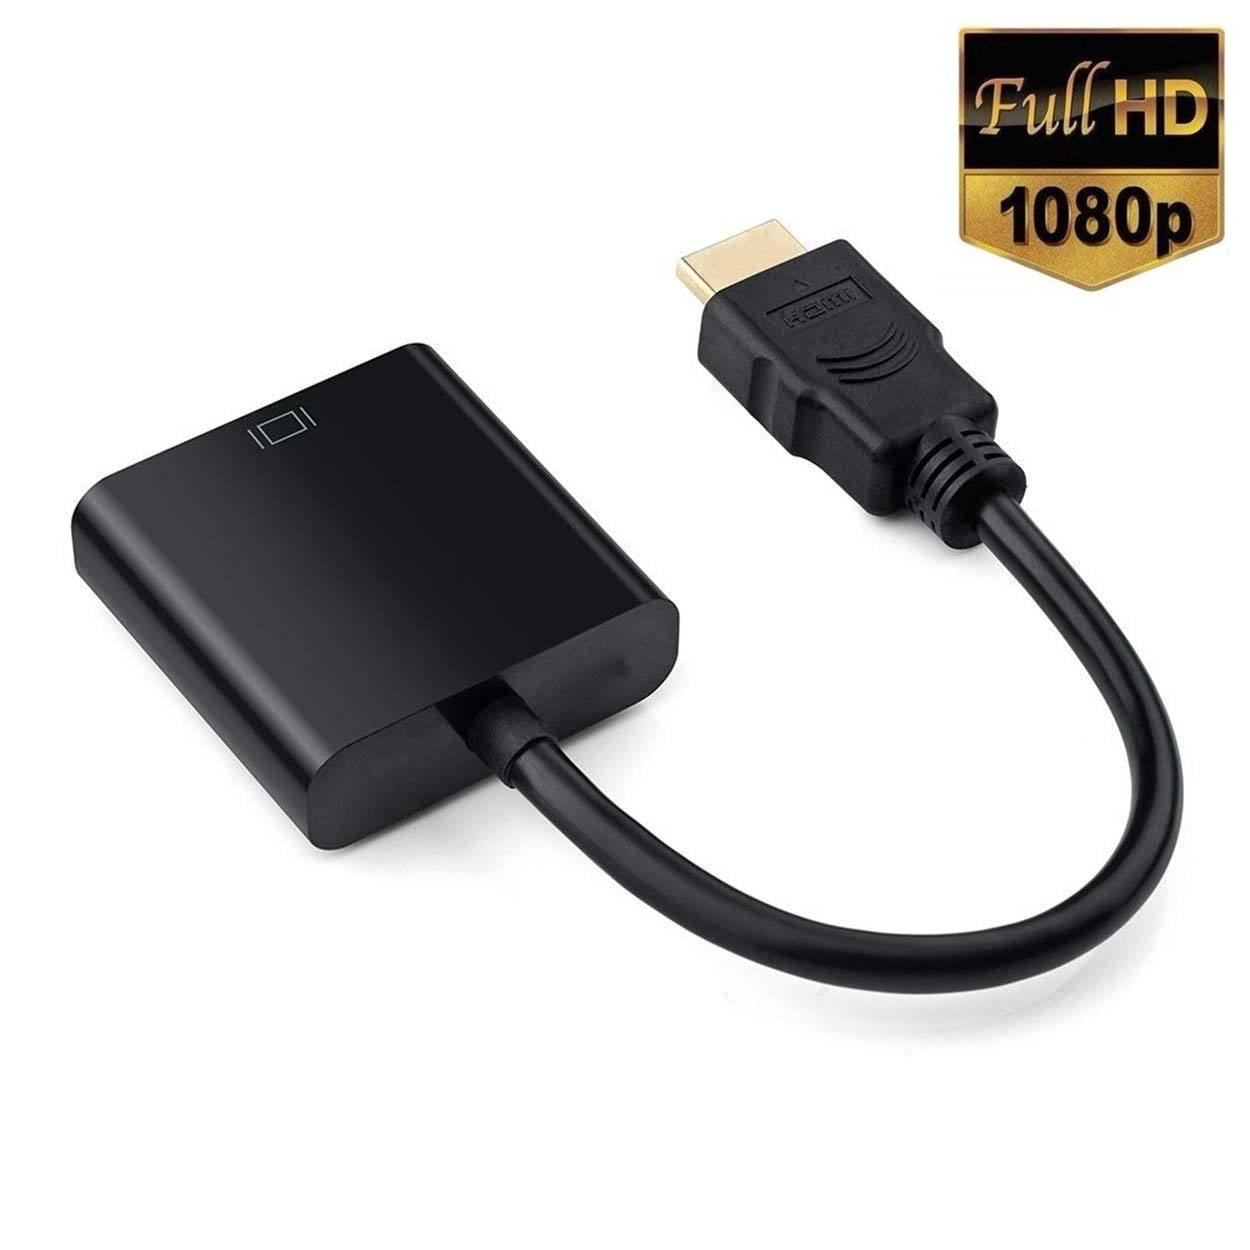 ONTEN HDMI to VGA, HDMI to VGA Adapter, Gold-Plated 1080P Active HDMI to  VGA Adapter Video Converter Male to Female PC/Laptop/DVD Black